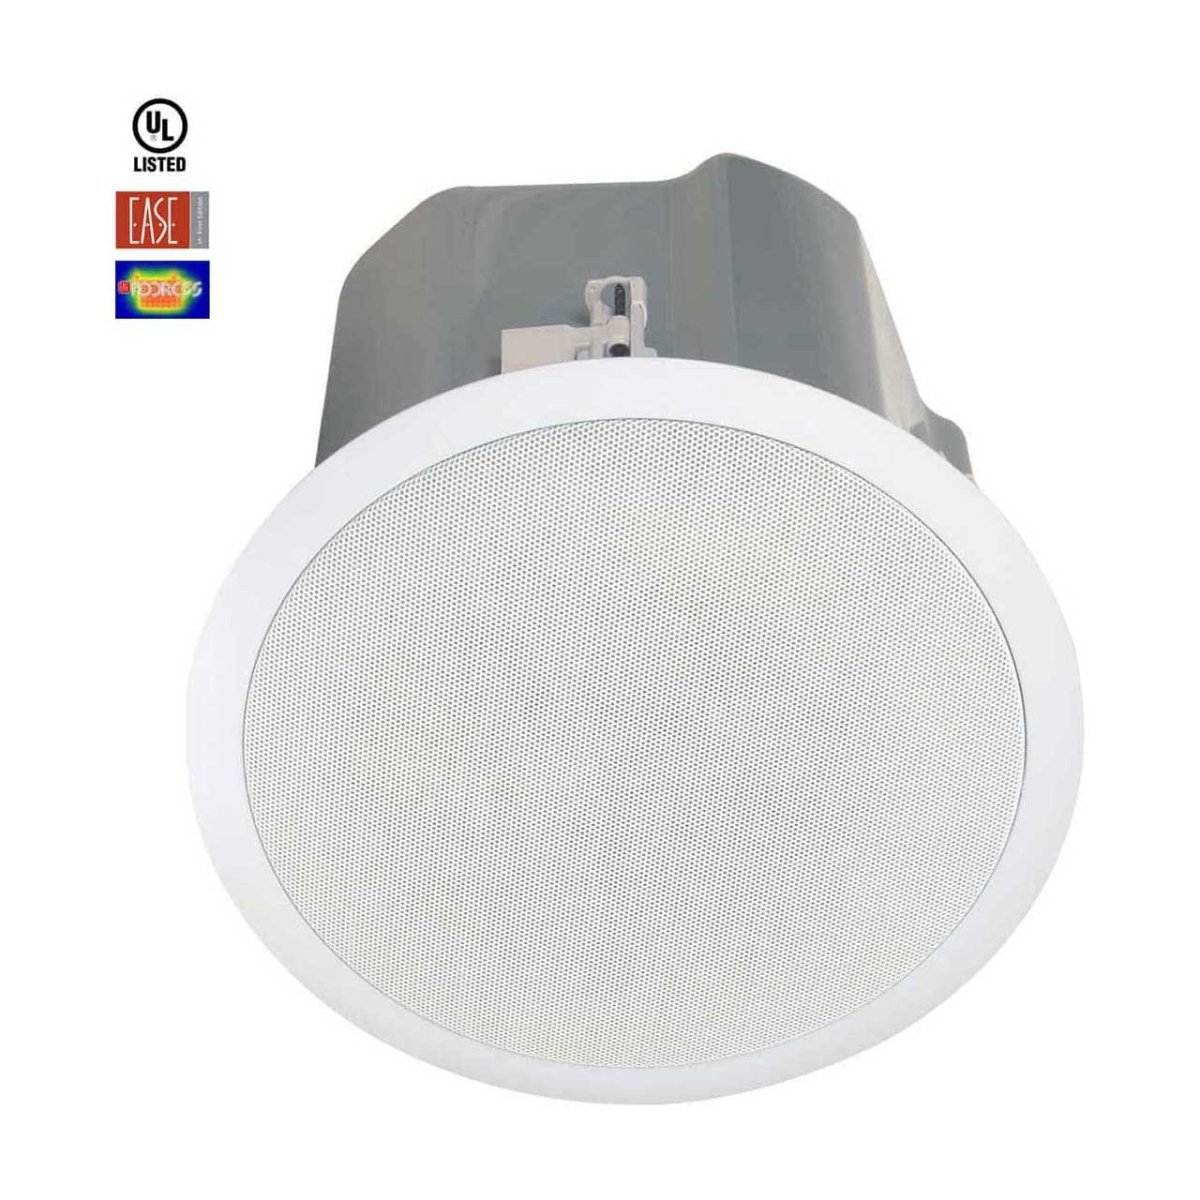 Picture of Lowell Manufacturing LMC-ES-82T 8 in. ES-82T Packaged Coaxial Ceiling Speaker with Grille Enclosure - Bridge